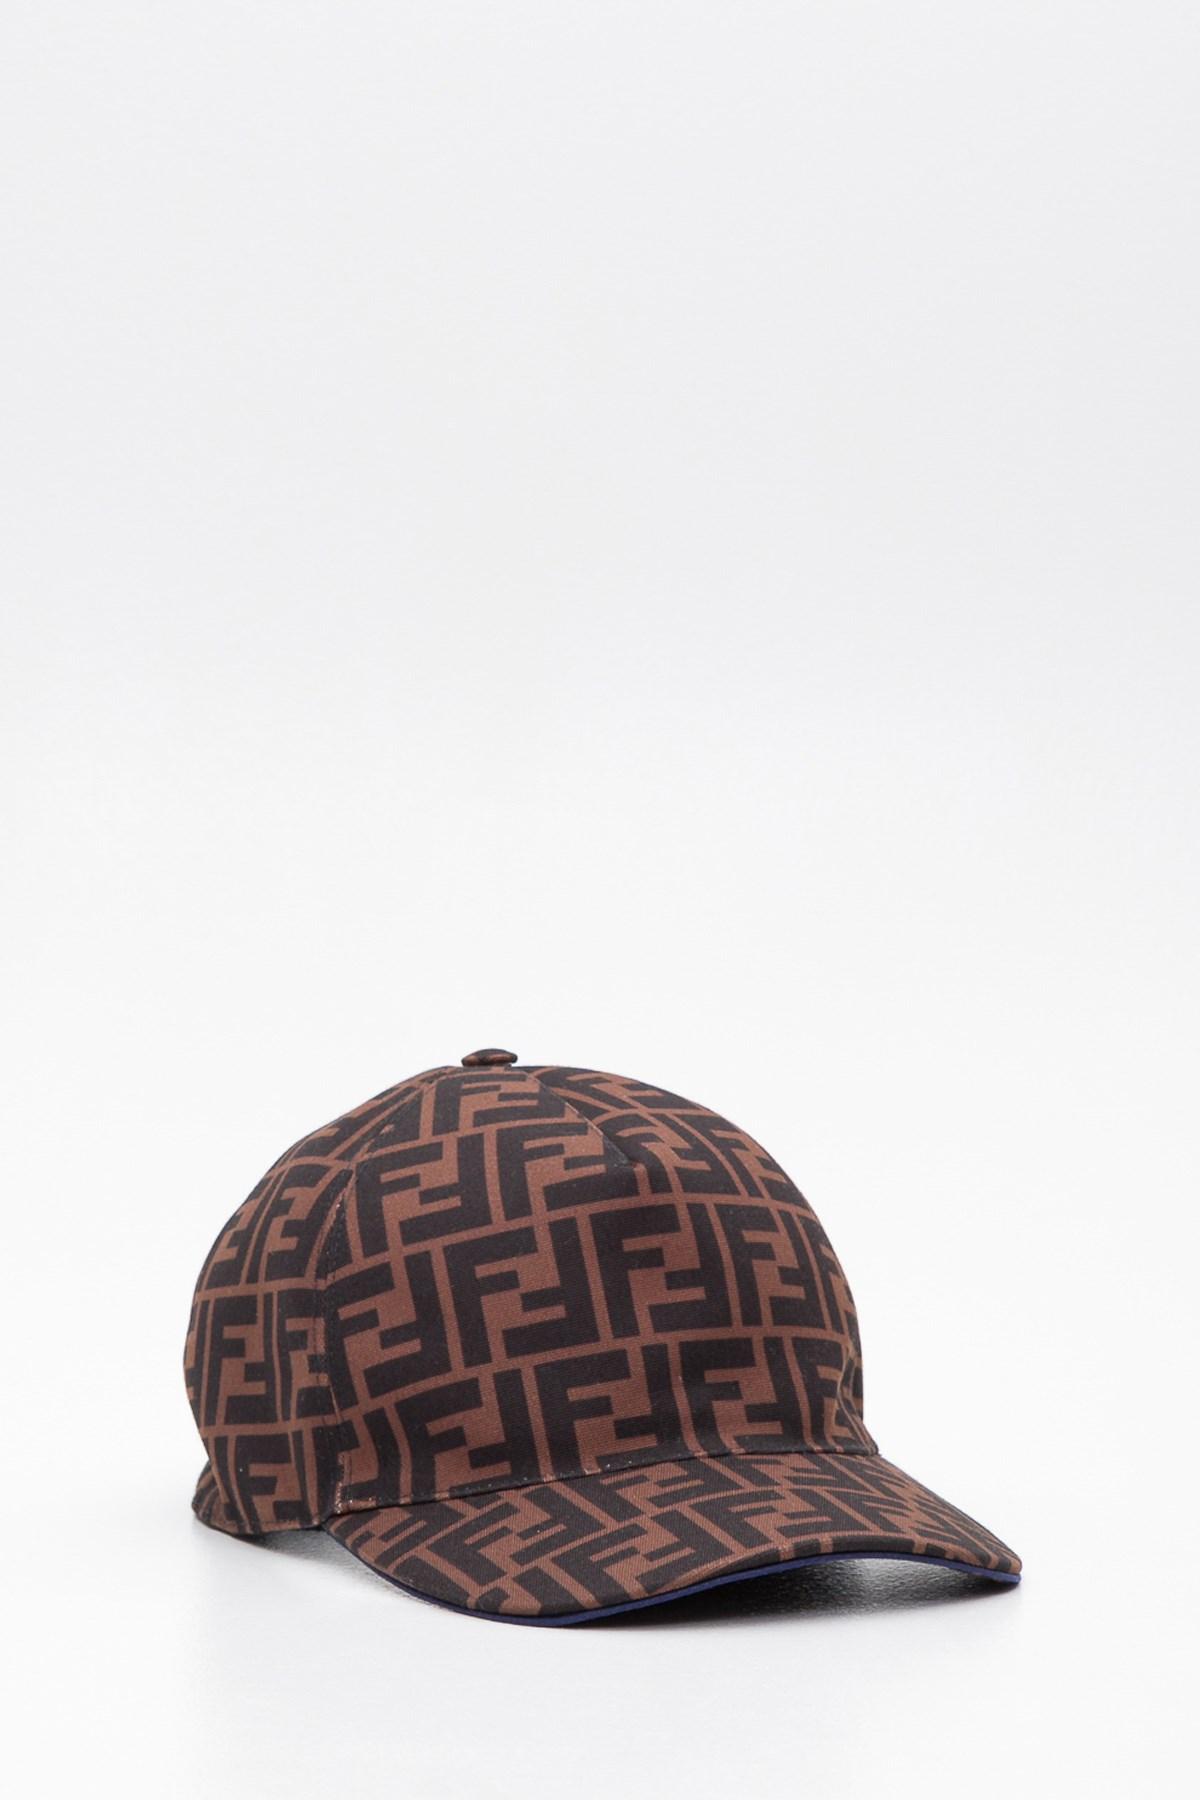 Fendi Synthetic Ff Cap in Tobacco/Yellow (Brown) for Men - Lyst